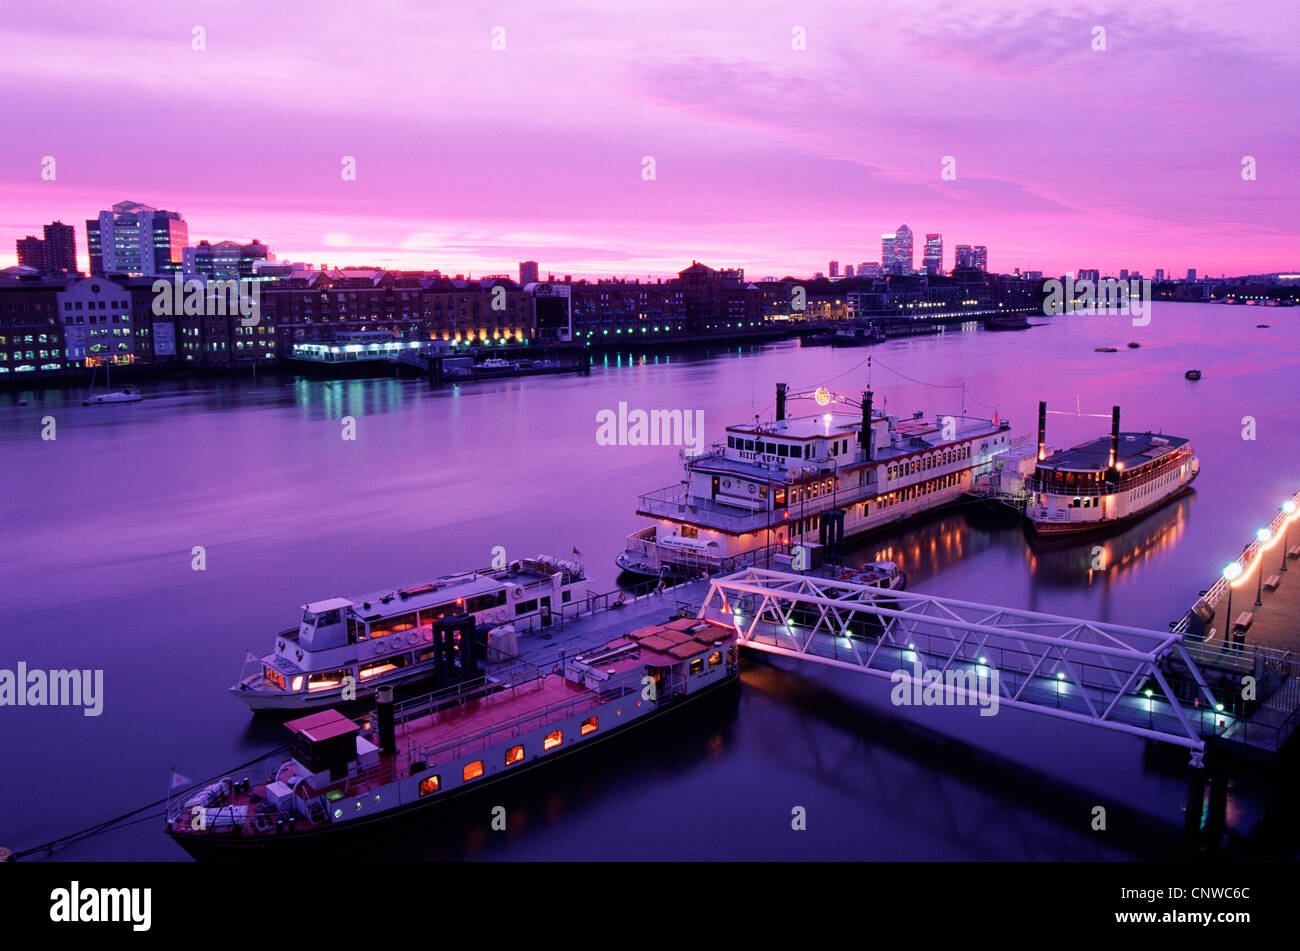 England, London, Night View of Boats on the Thames River with Docklands and Canary Wharf Skyline in Background Stock Photo